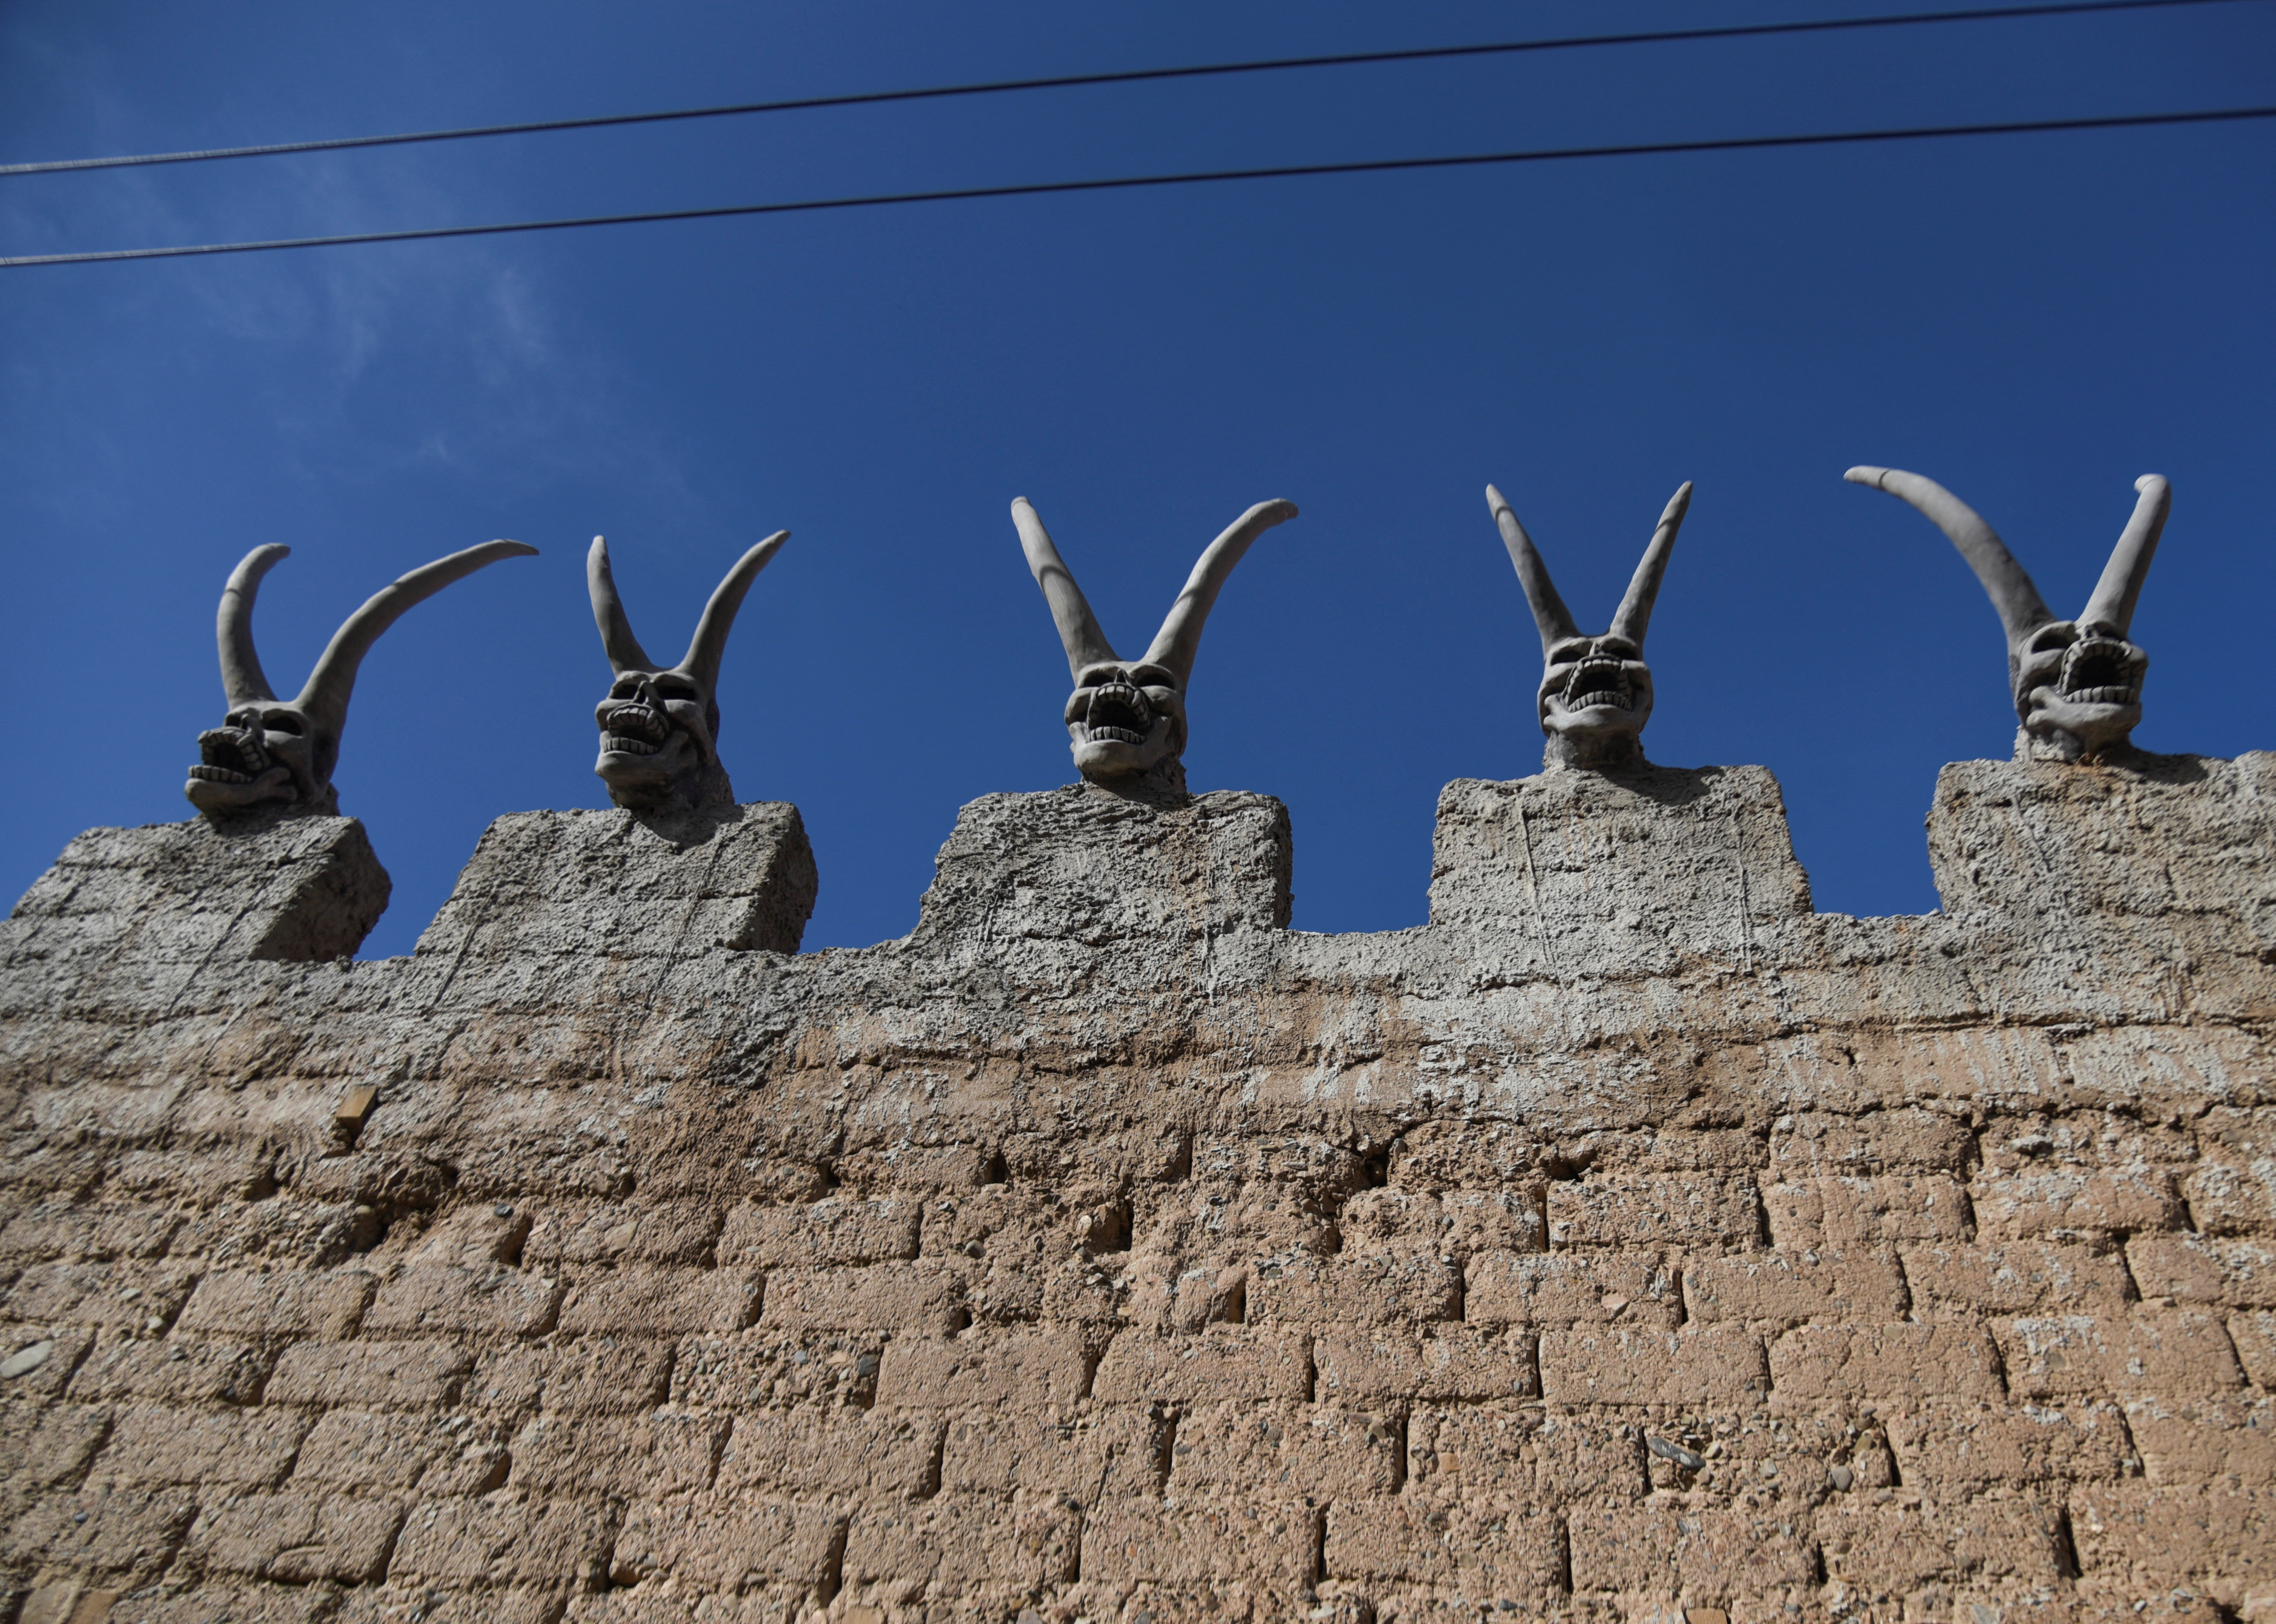 Sculptures of horned devils adorn the house of Bolivian miner David Choque, intended as a playful nod to the South American country's colonial past, but which has shocked some neighbors who fear a link to occult rituals, in El Alto, Bolivia February 16, 2022. REUTERS/Claudia Morales